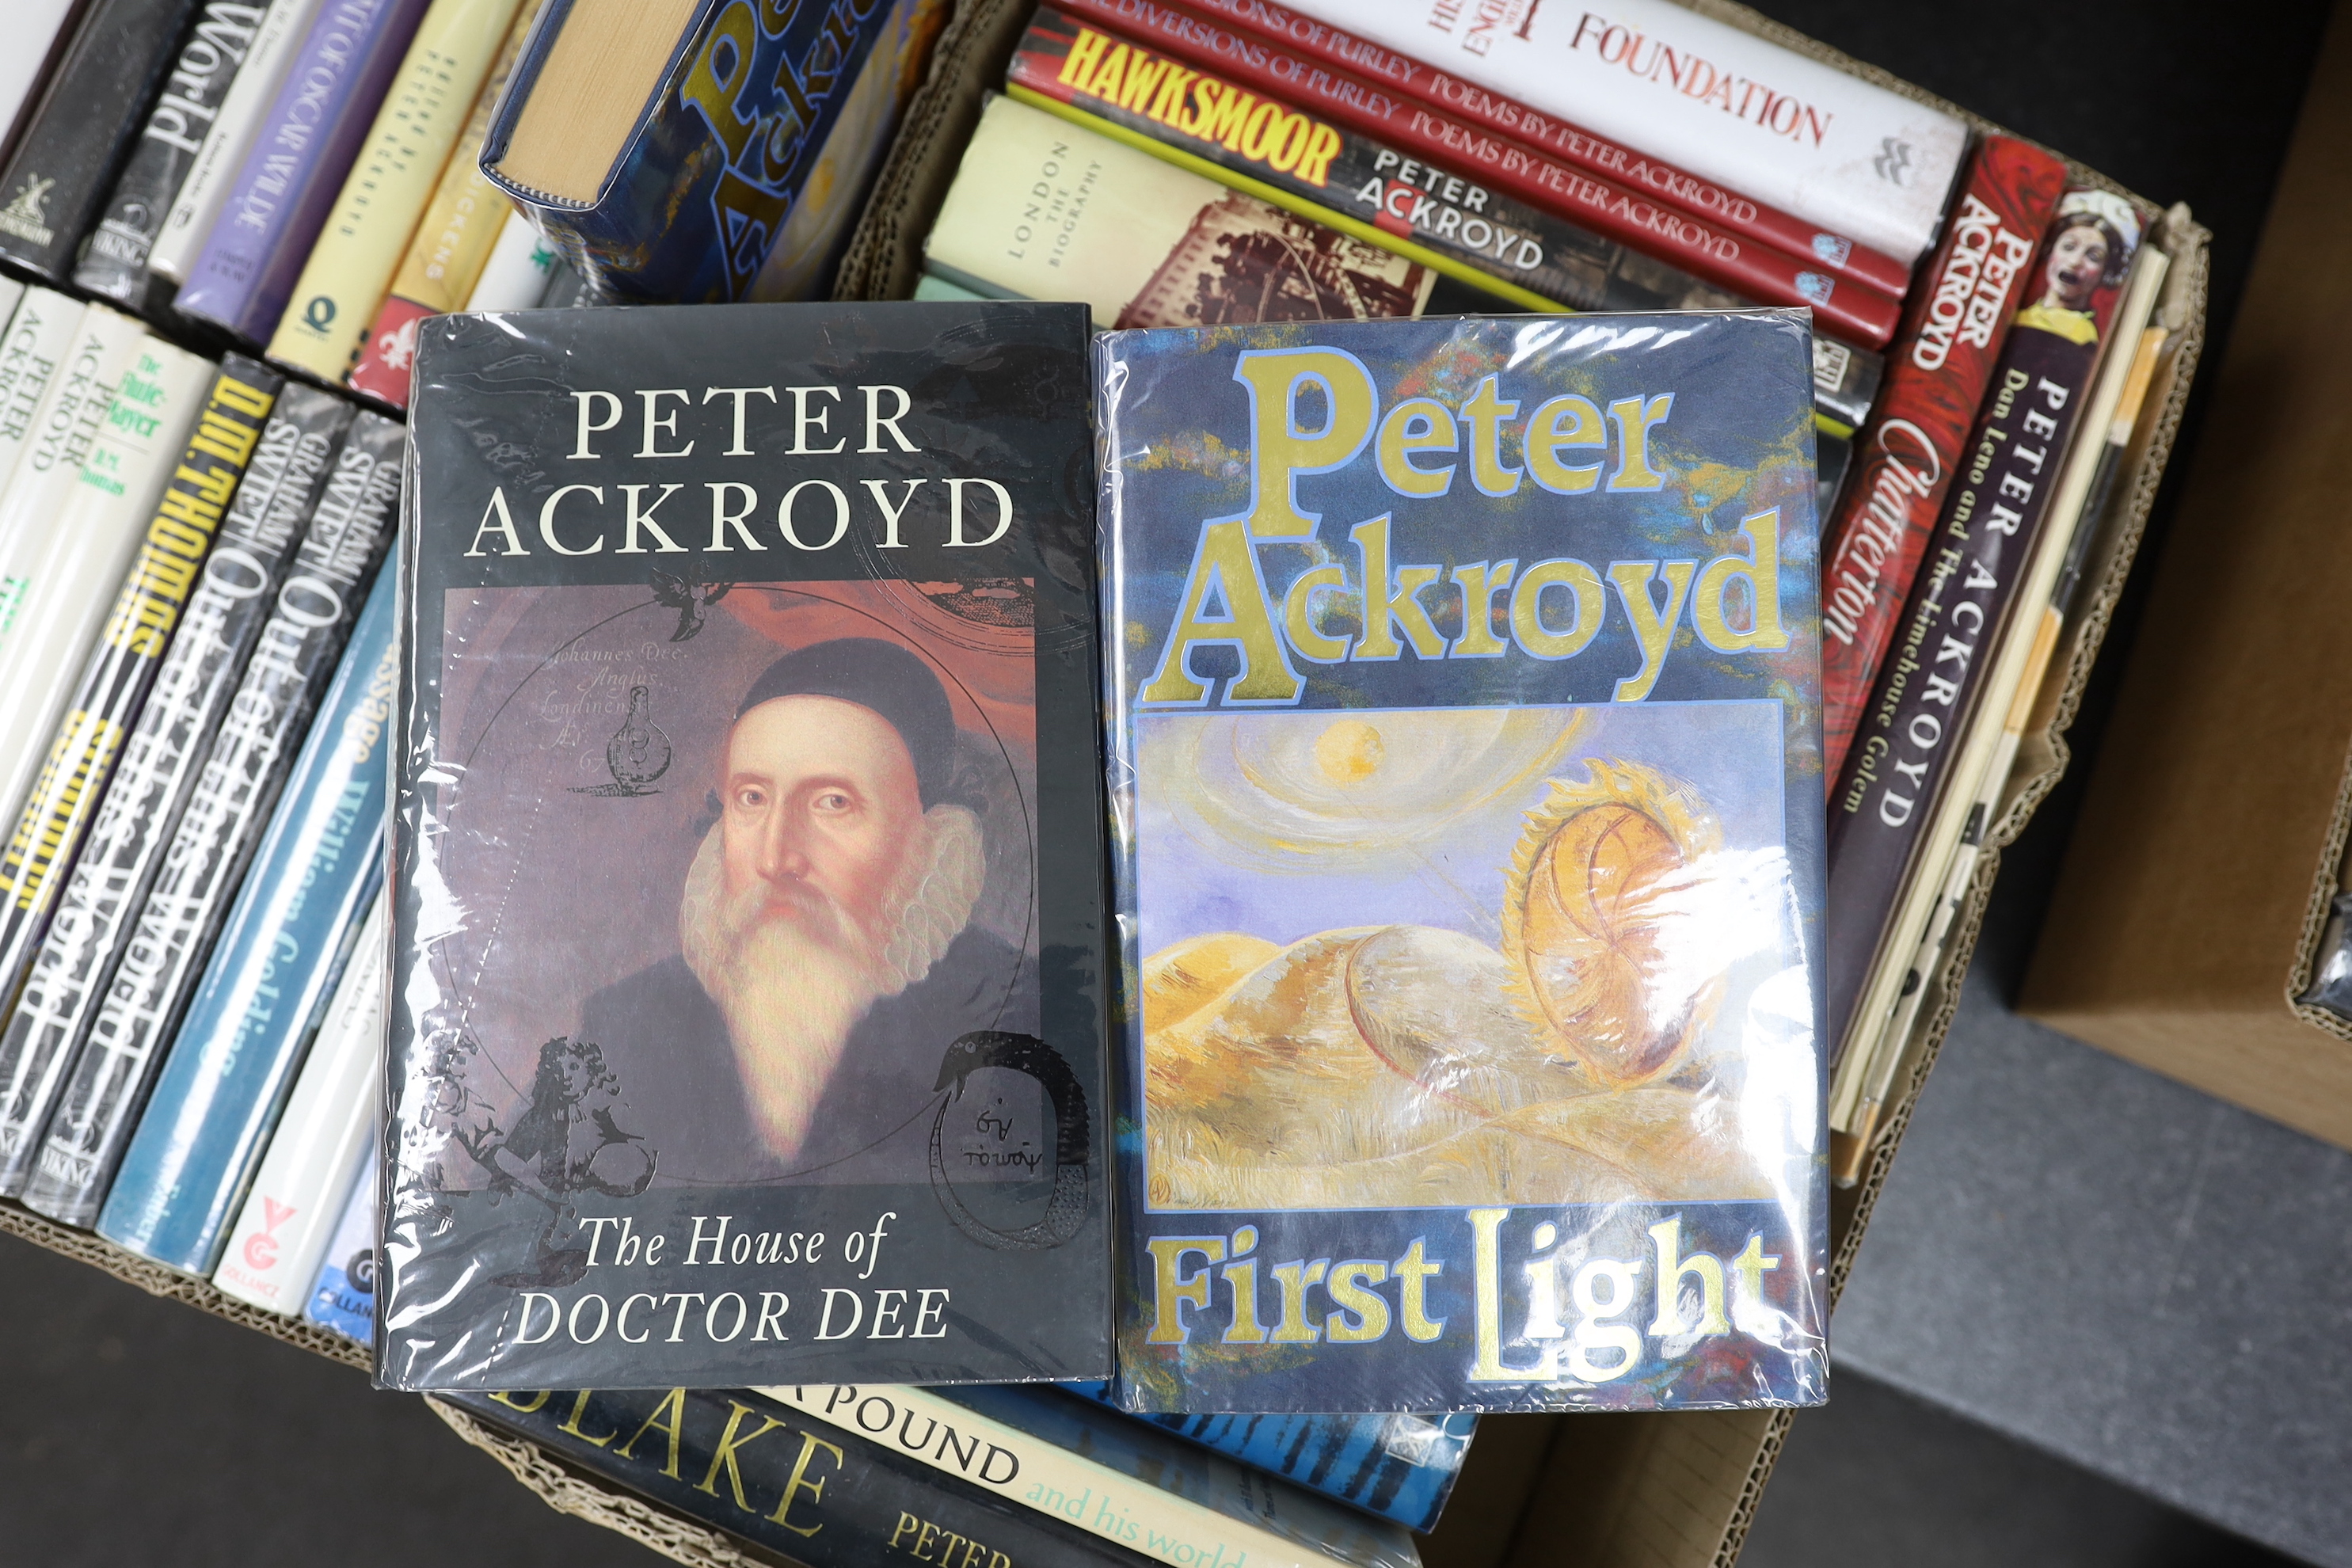 Ackroyd, Peter. London Lickpenny. Ferry Press, 1973. One of a limited edition of 500 copies. Country Life. 1978. One of a limited edition of 350 copies. Chatterton. 1987; The Diversions of Purley. Poems by Peter Ackroyd.